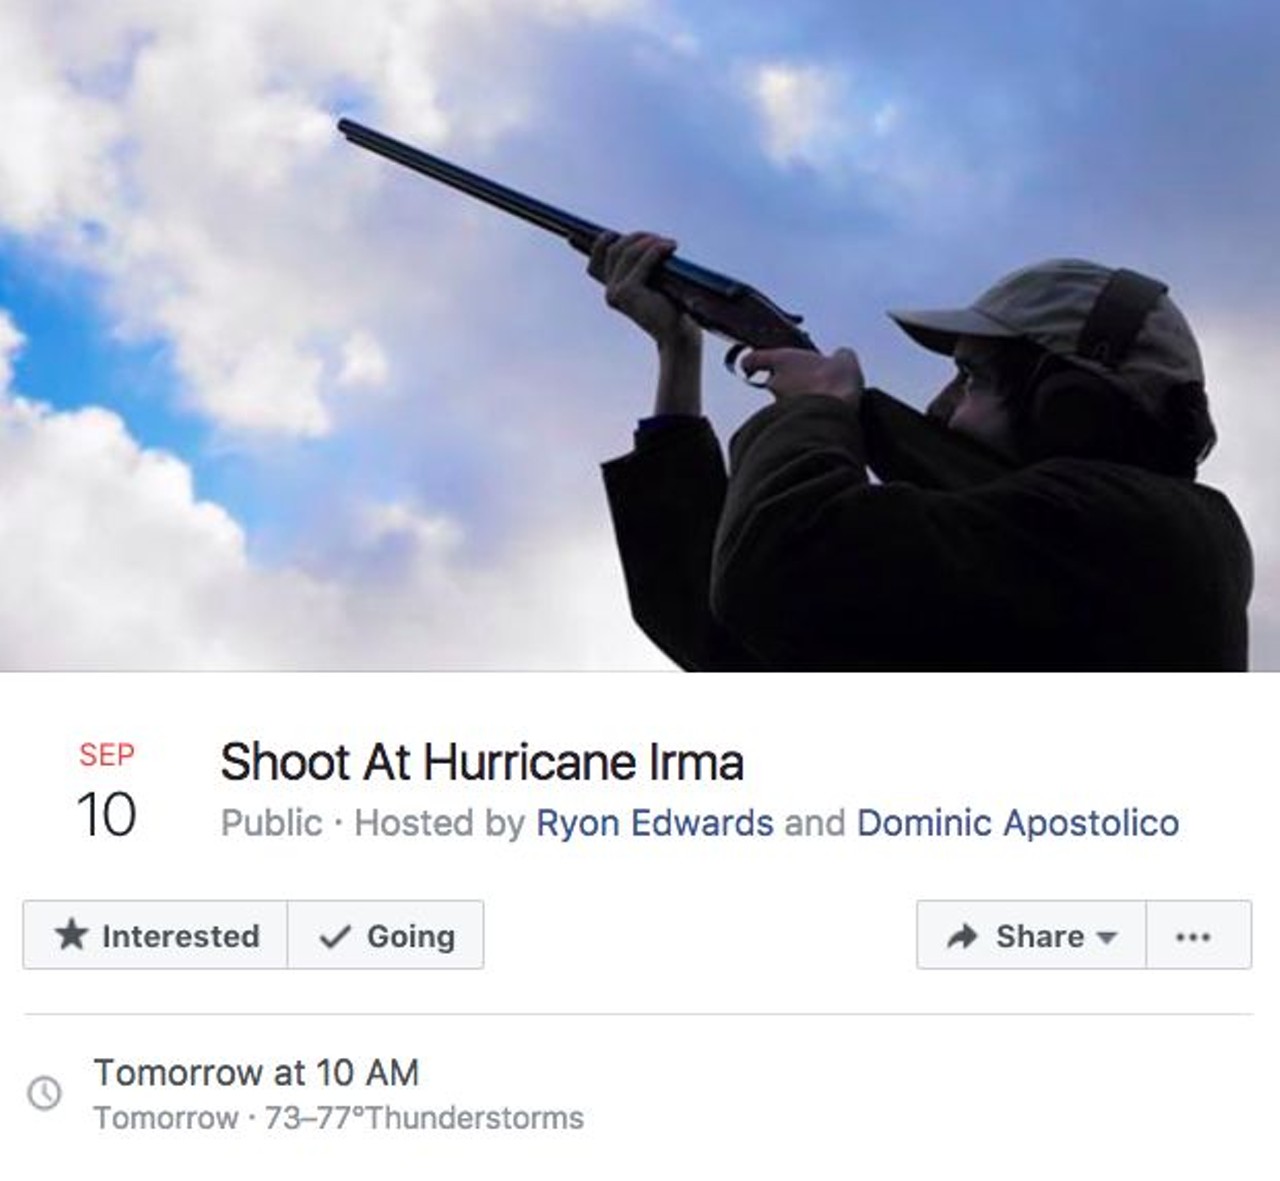 The 20 best Hurricane Irma Facebook events we wish were real